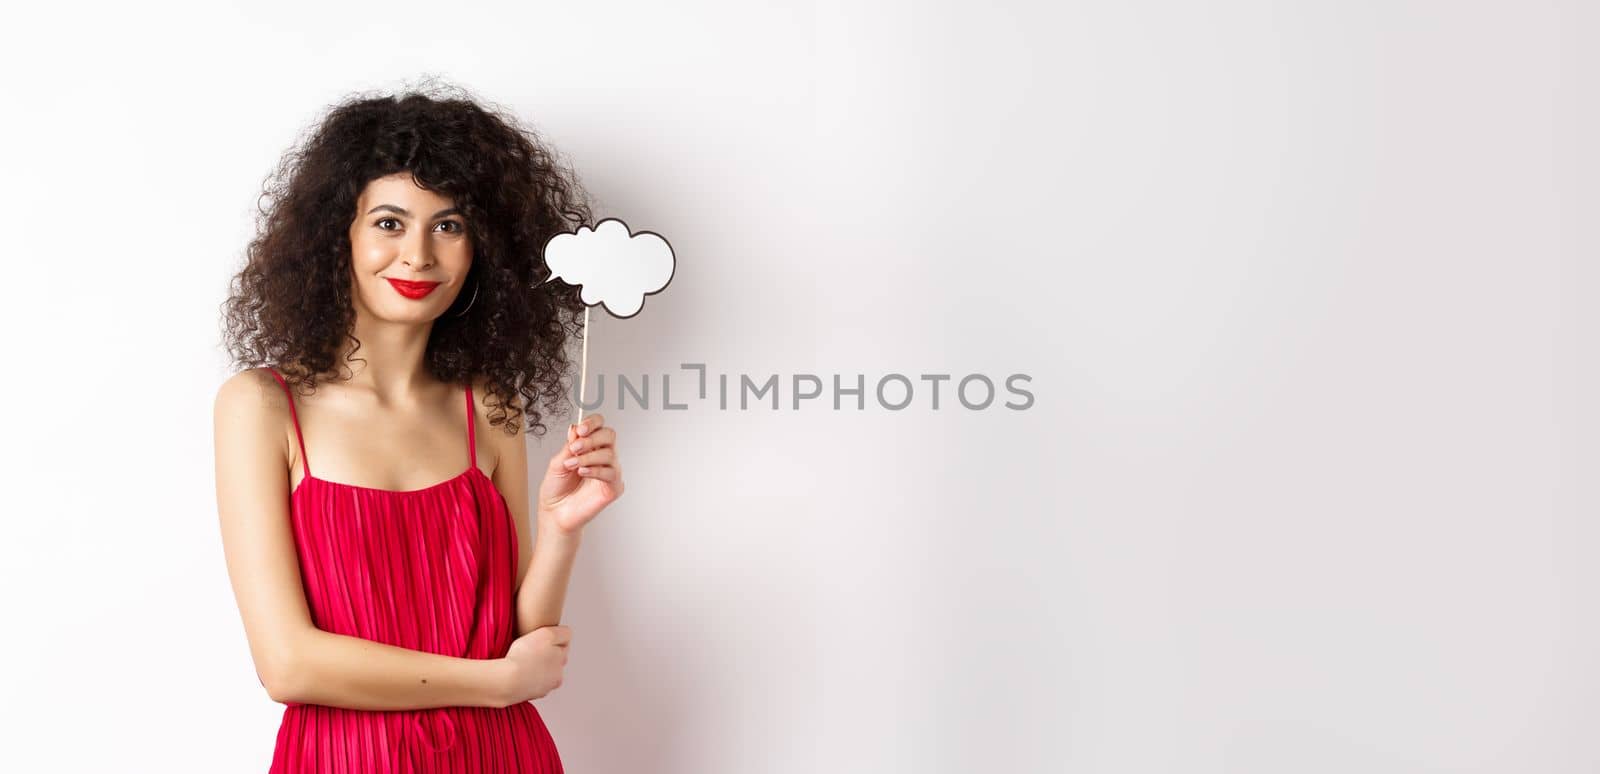 Elegant woman with curly hair, wearing red evening dress, holding cloud and smiling, standing on white background.